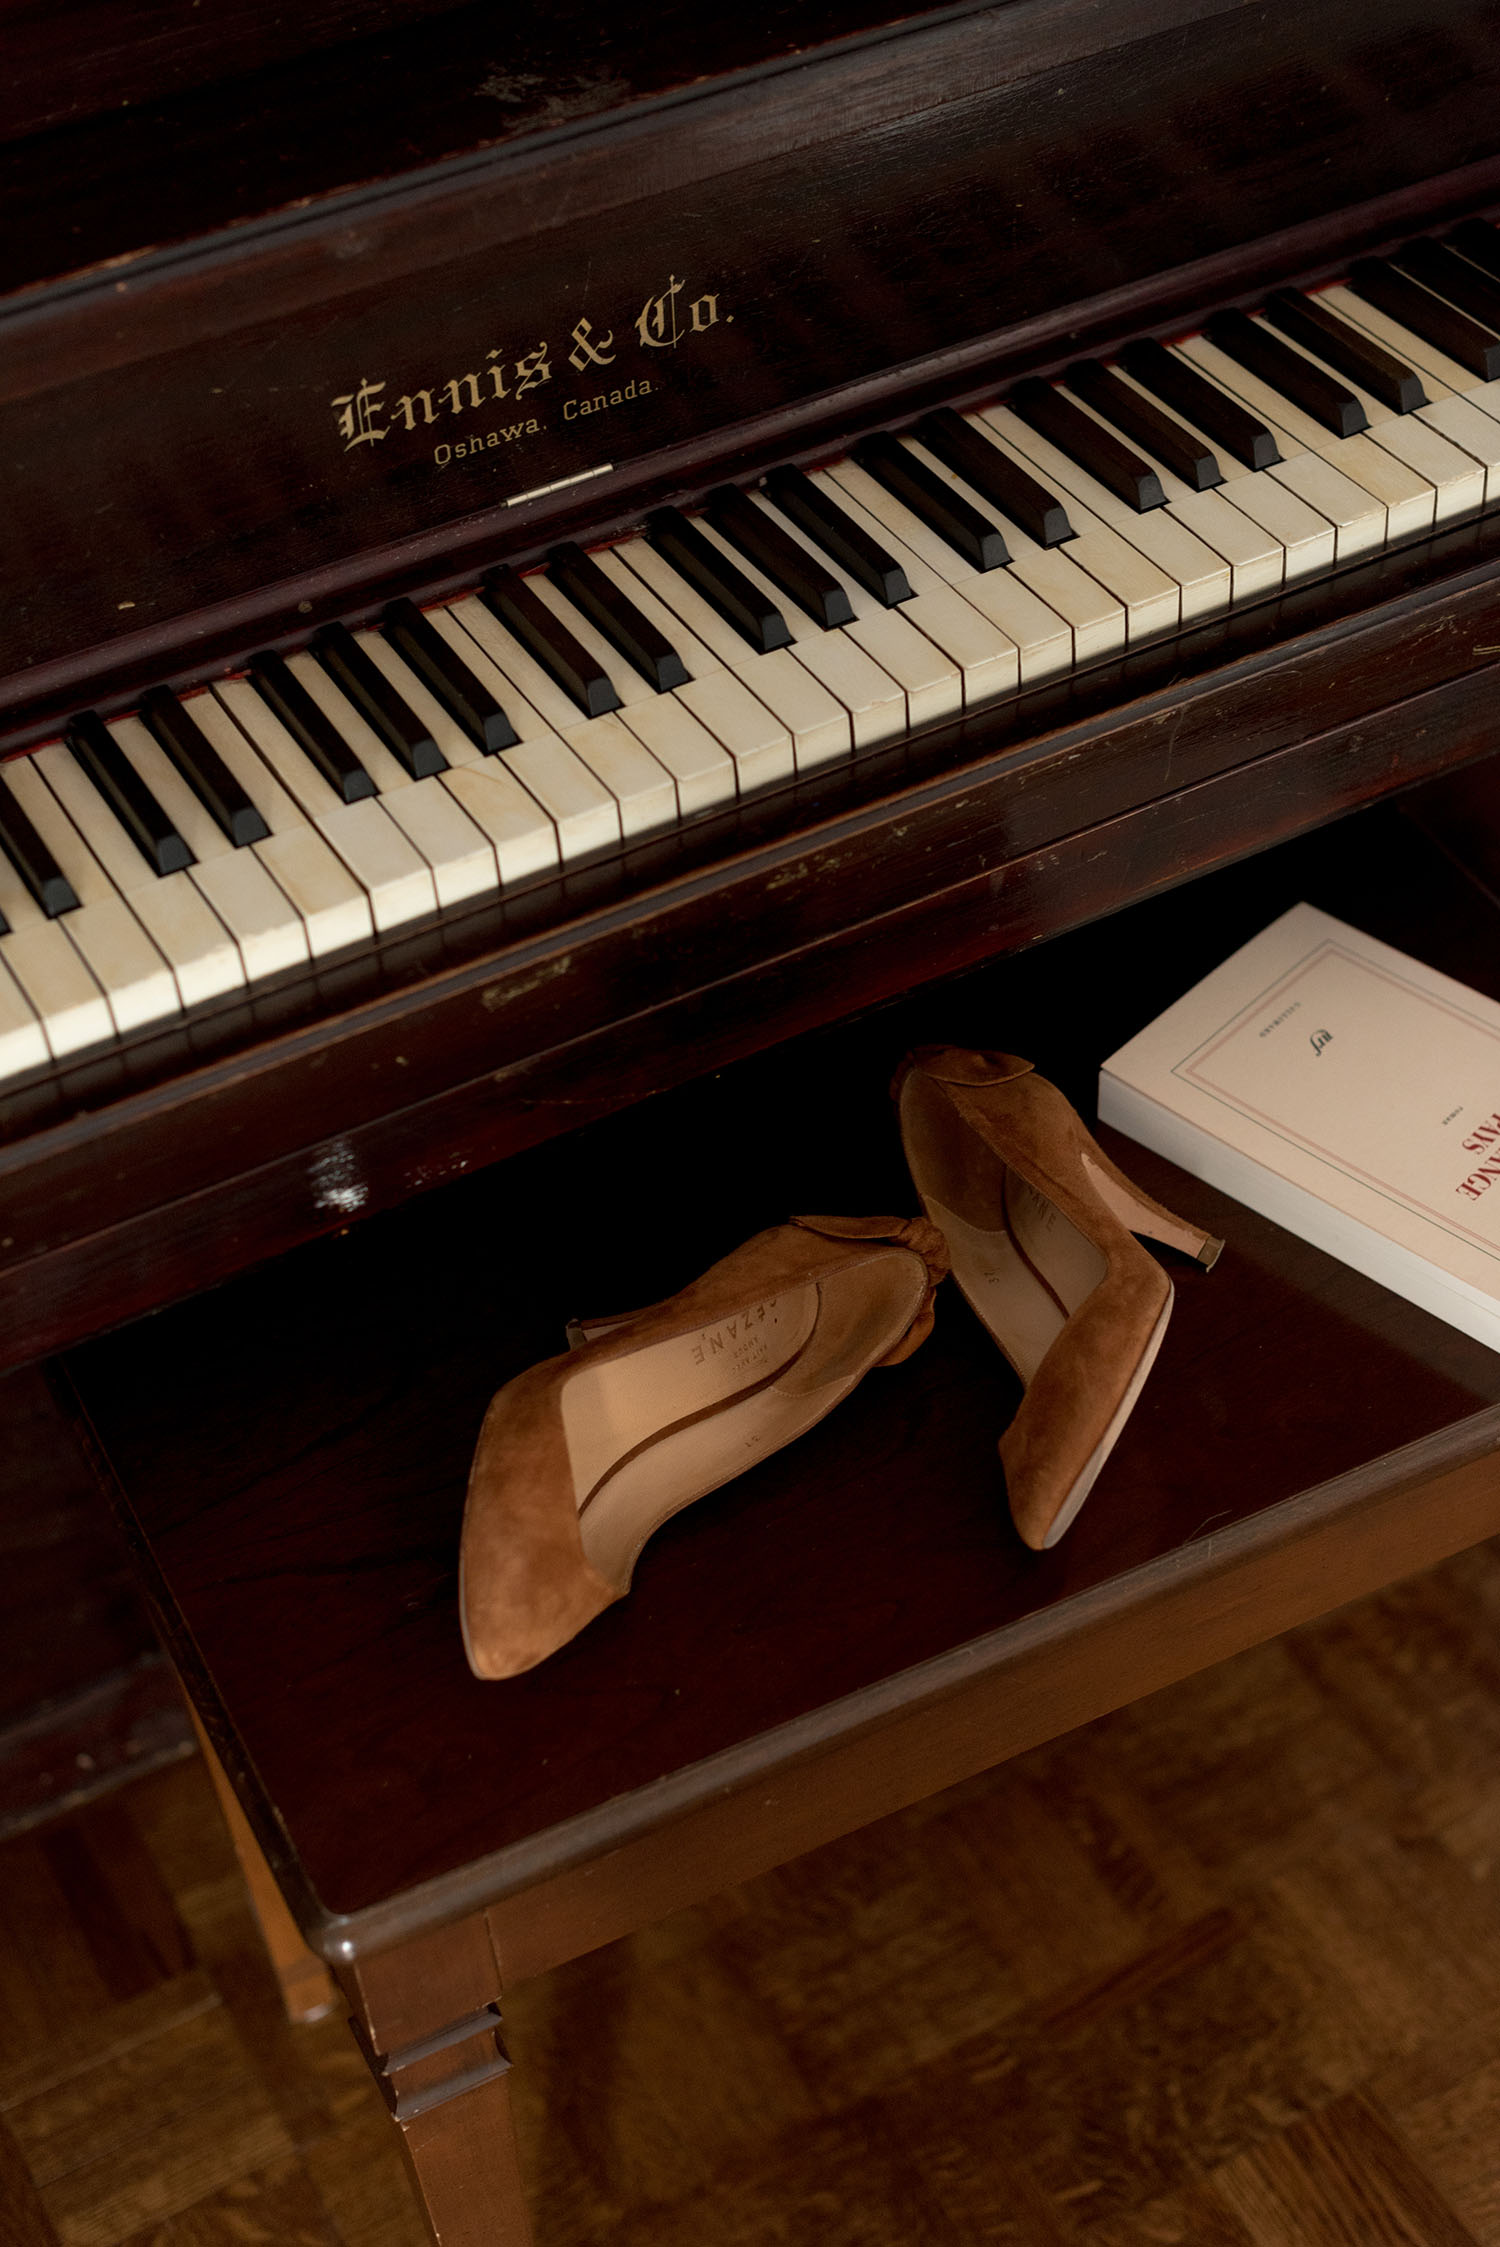 A pair of Sezane pumps and an Editions Gallimard novel on a piano bench, as captured by top Canadian fashion blogger Cee Fardoe of Coco & Vera